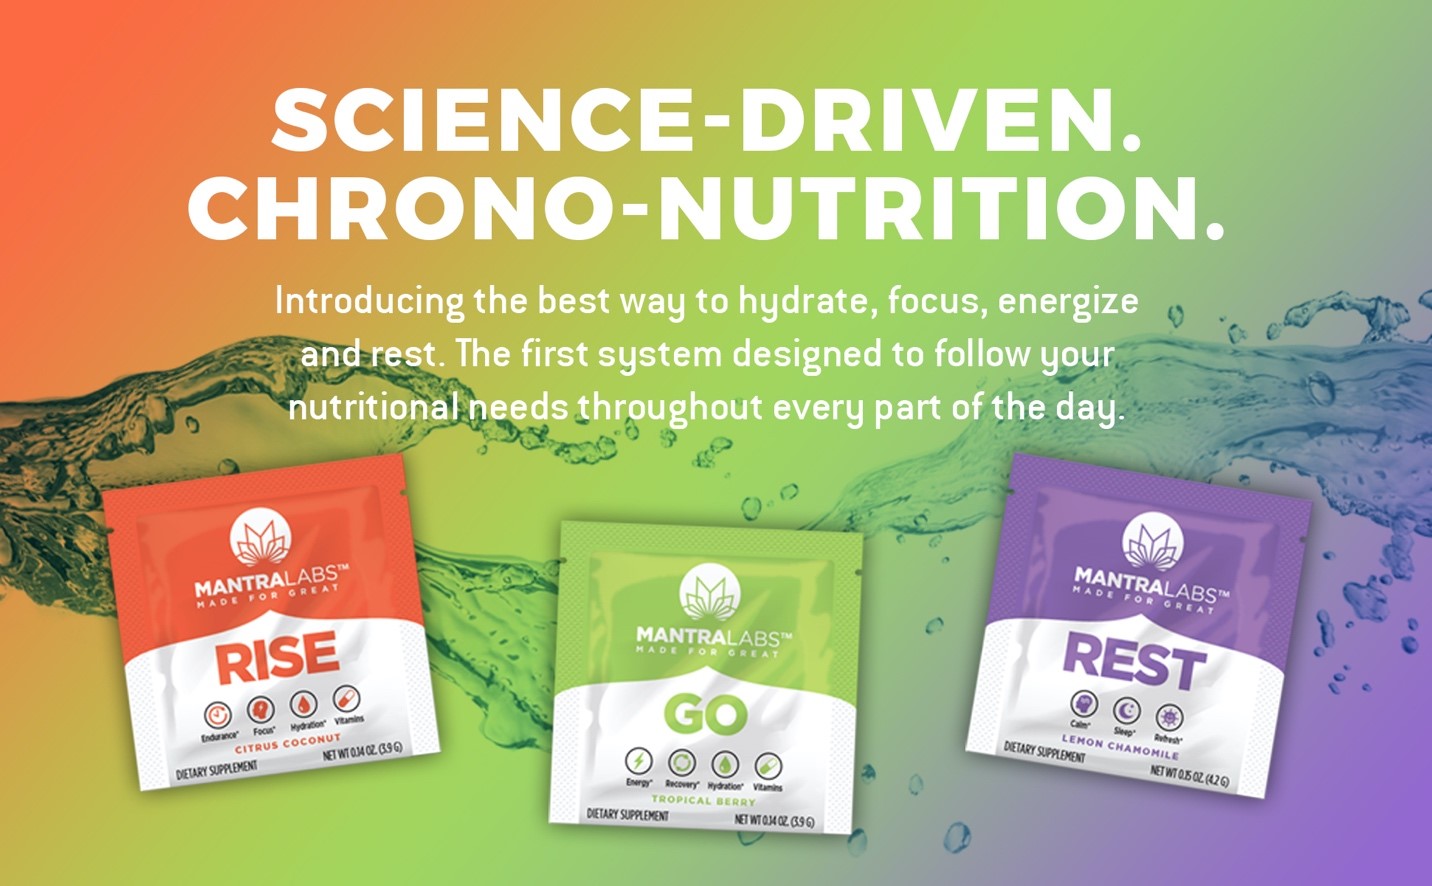 RISE, GO, REST Science-Driven Chrono-Nutrition. The best way to hydrate, focus, energize and rest.